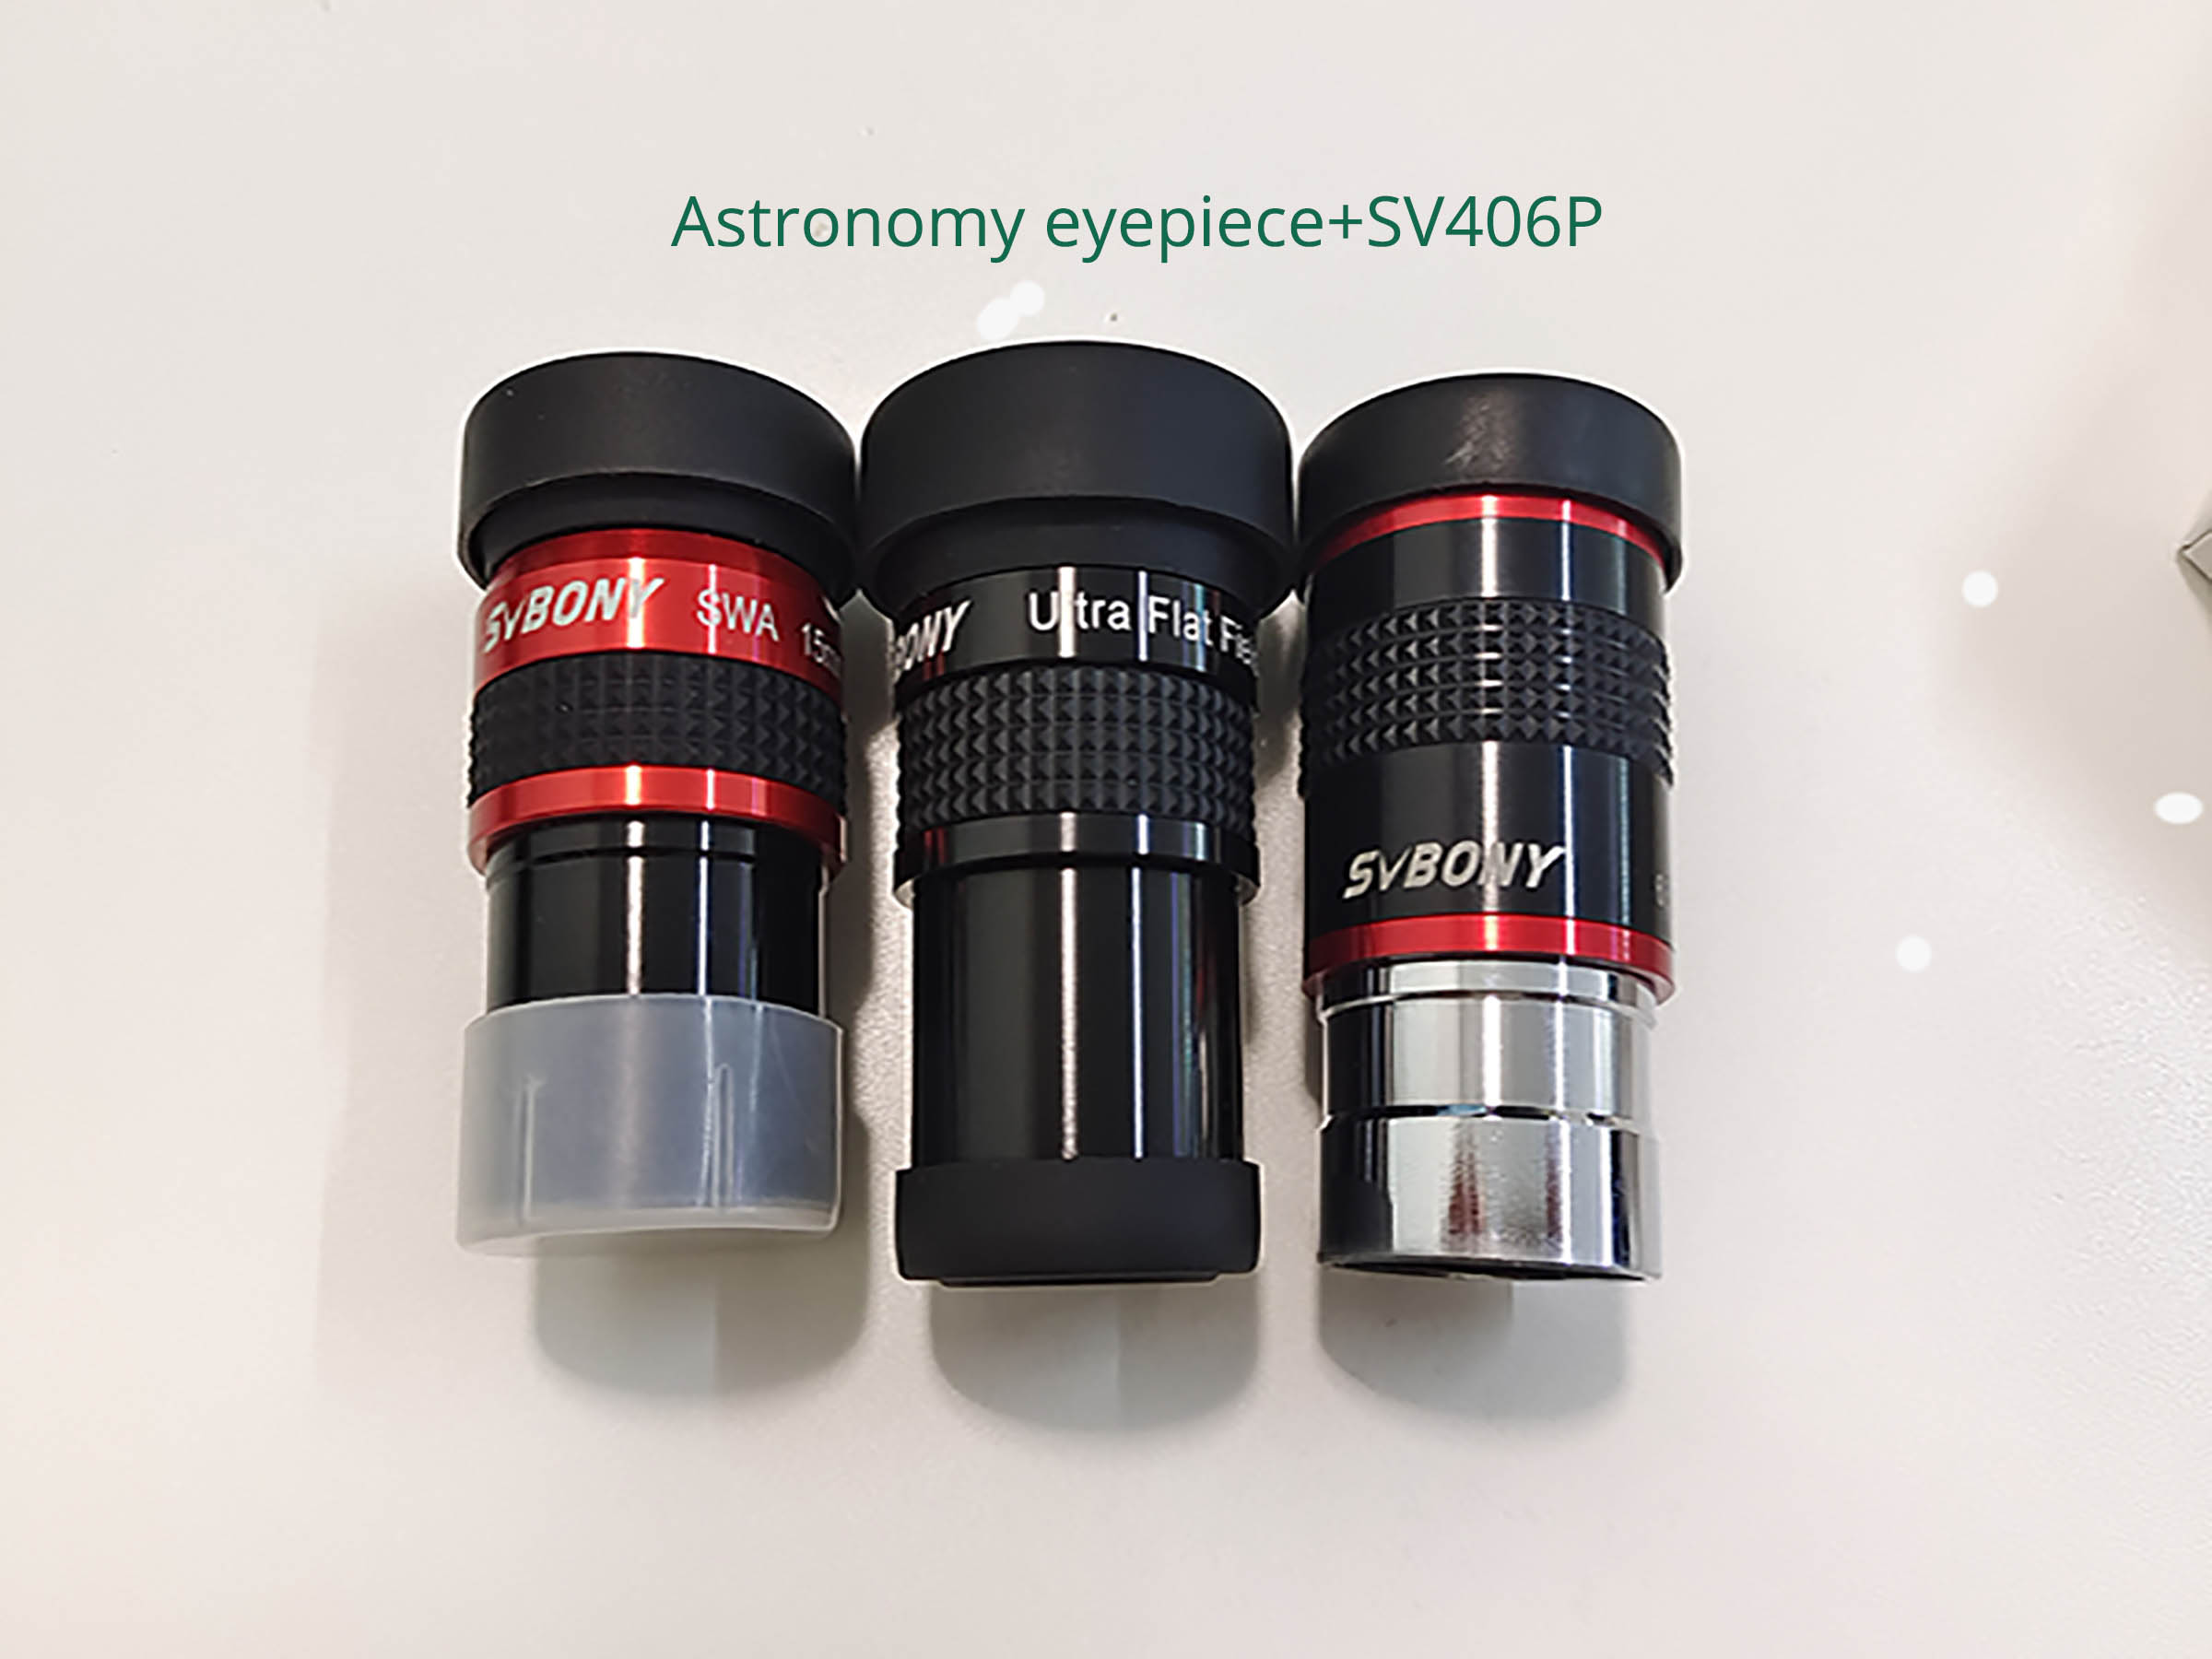 Dose SV406p can fit with astronomy eyepiece without any accessories?